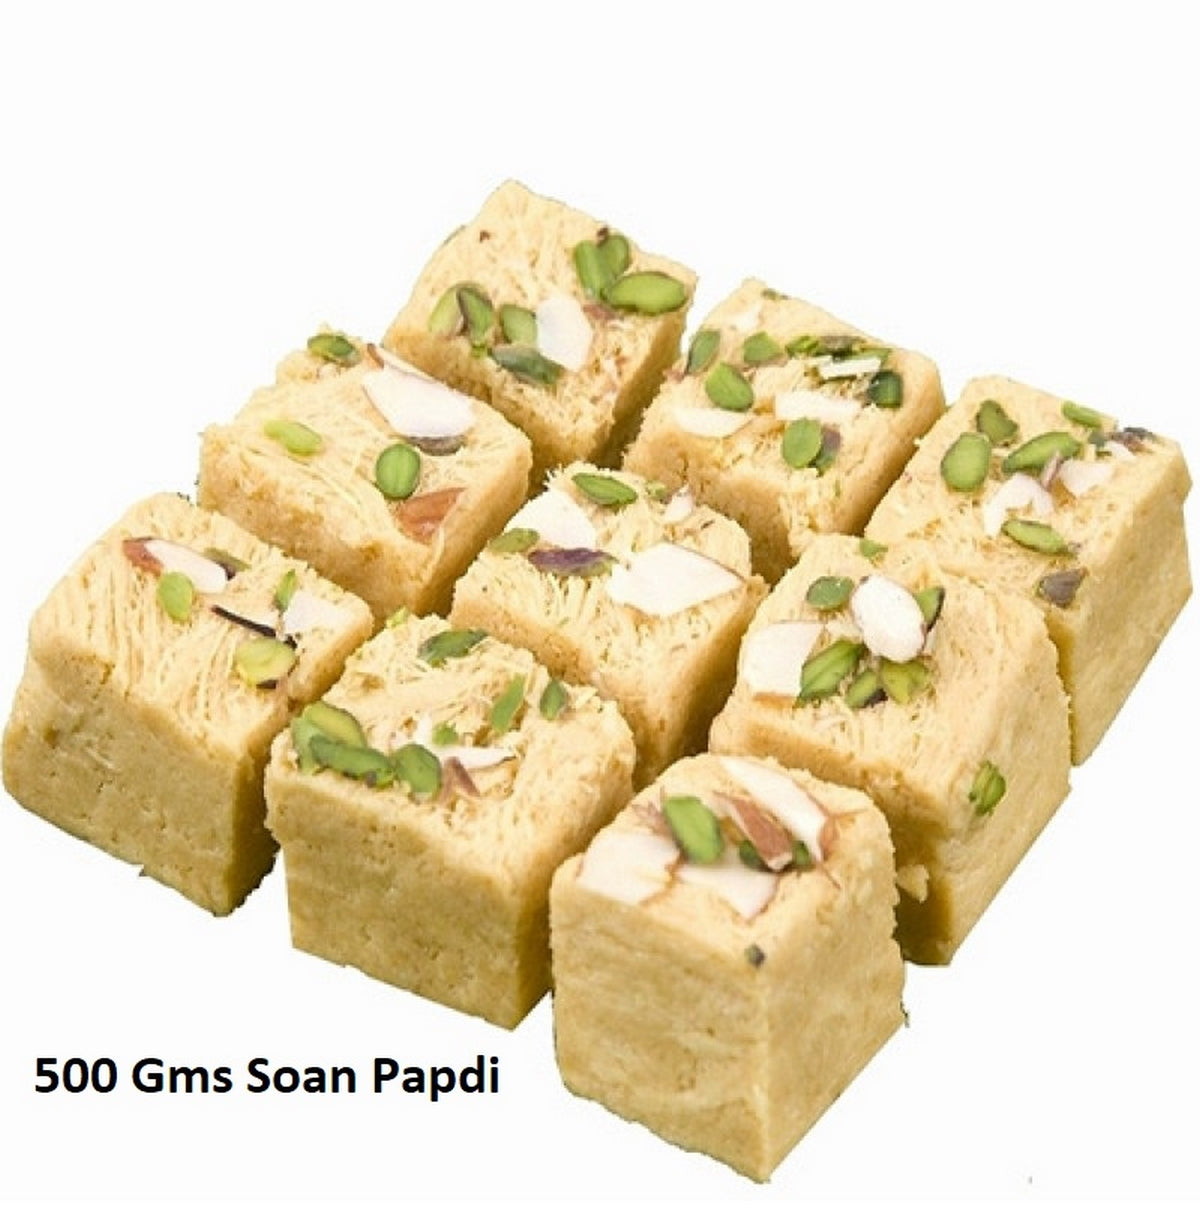 Designer Rakhi with Soan Papdi (500 Gm) and Roli Chawal Pack, Best Wishes Greeting Card 2